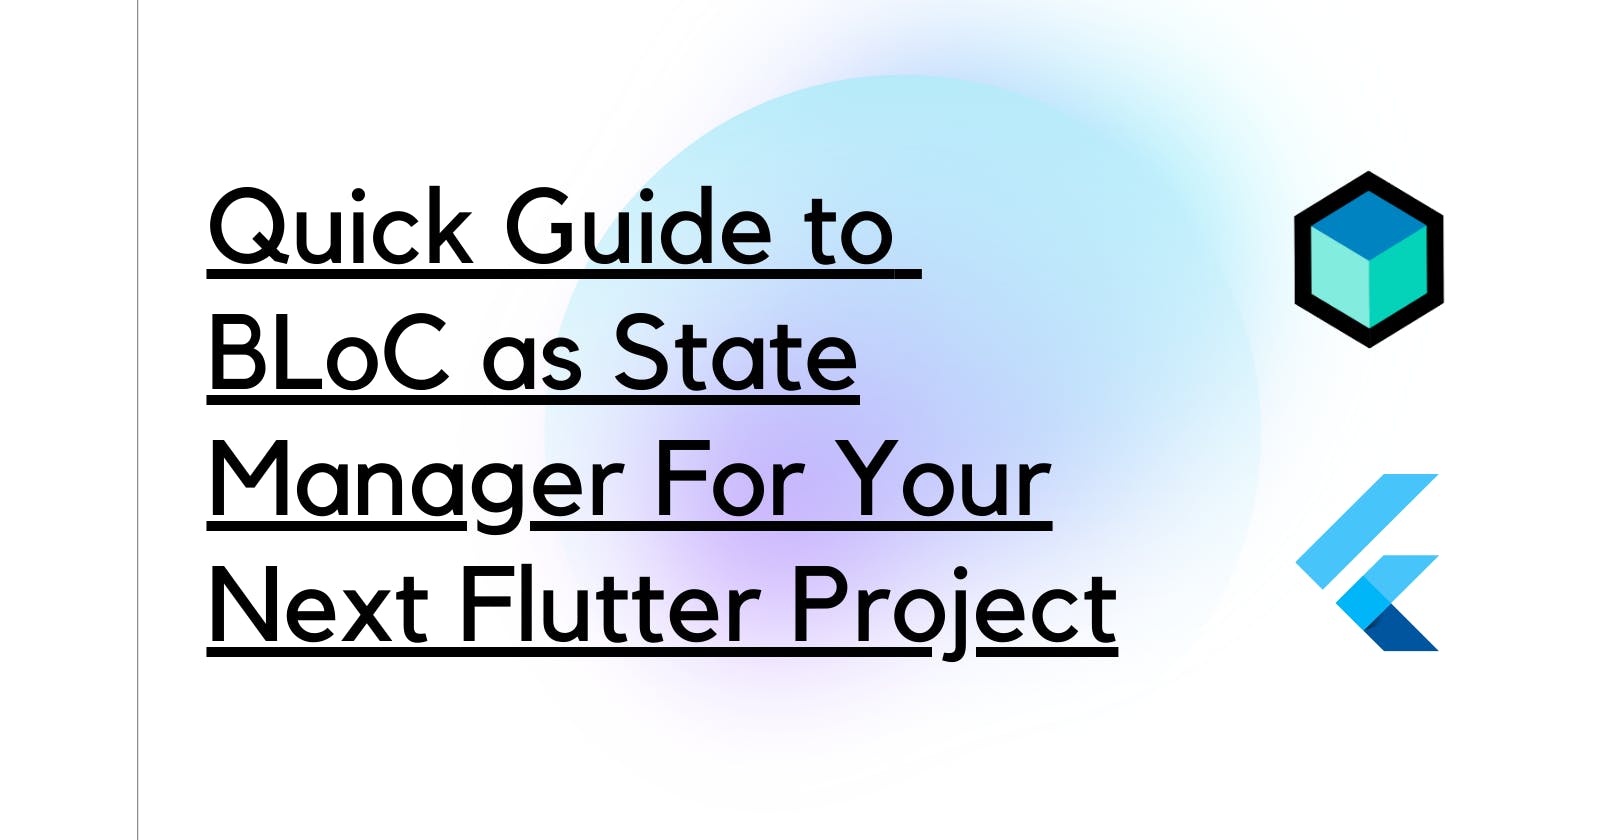 Quick Guide to BLoC as State Manager For Your Next Flutter Project